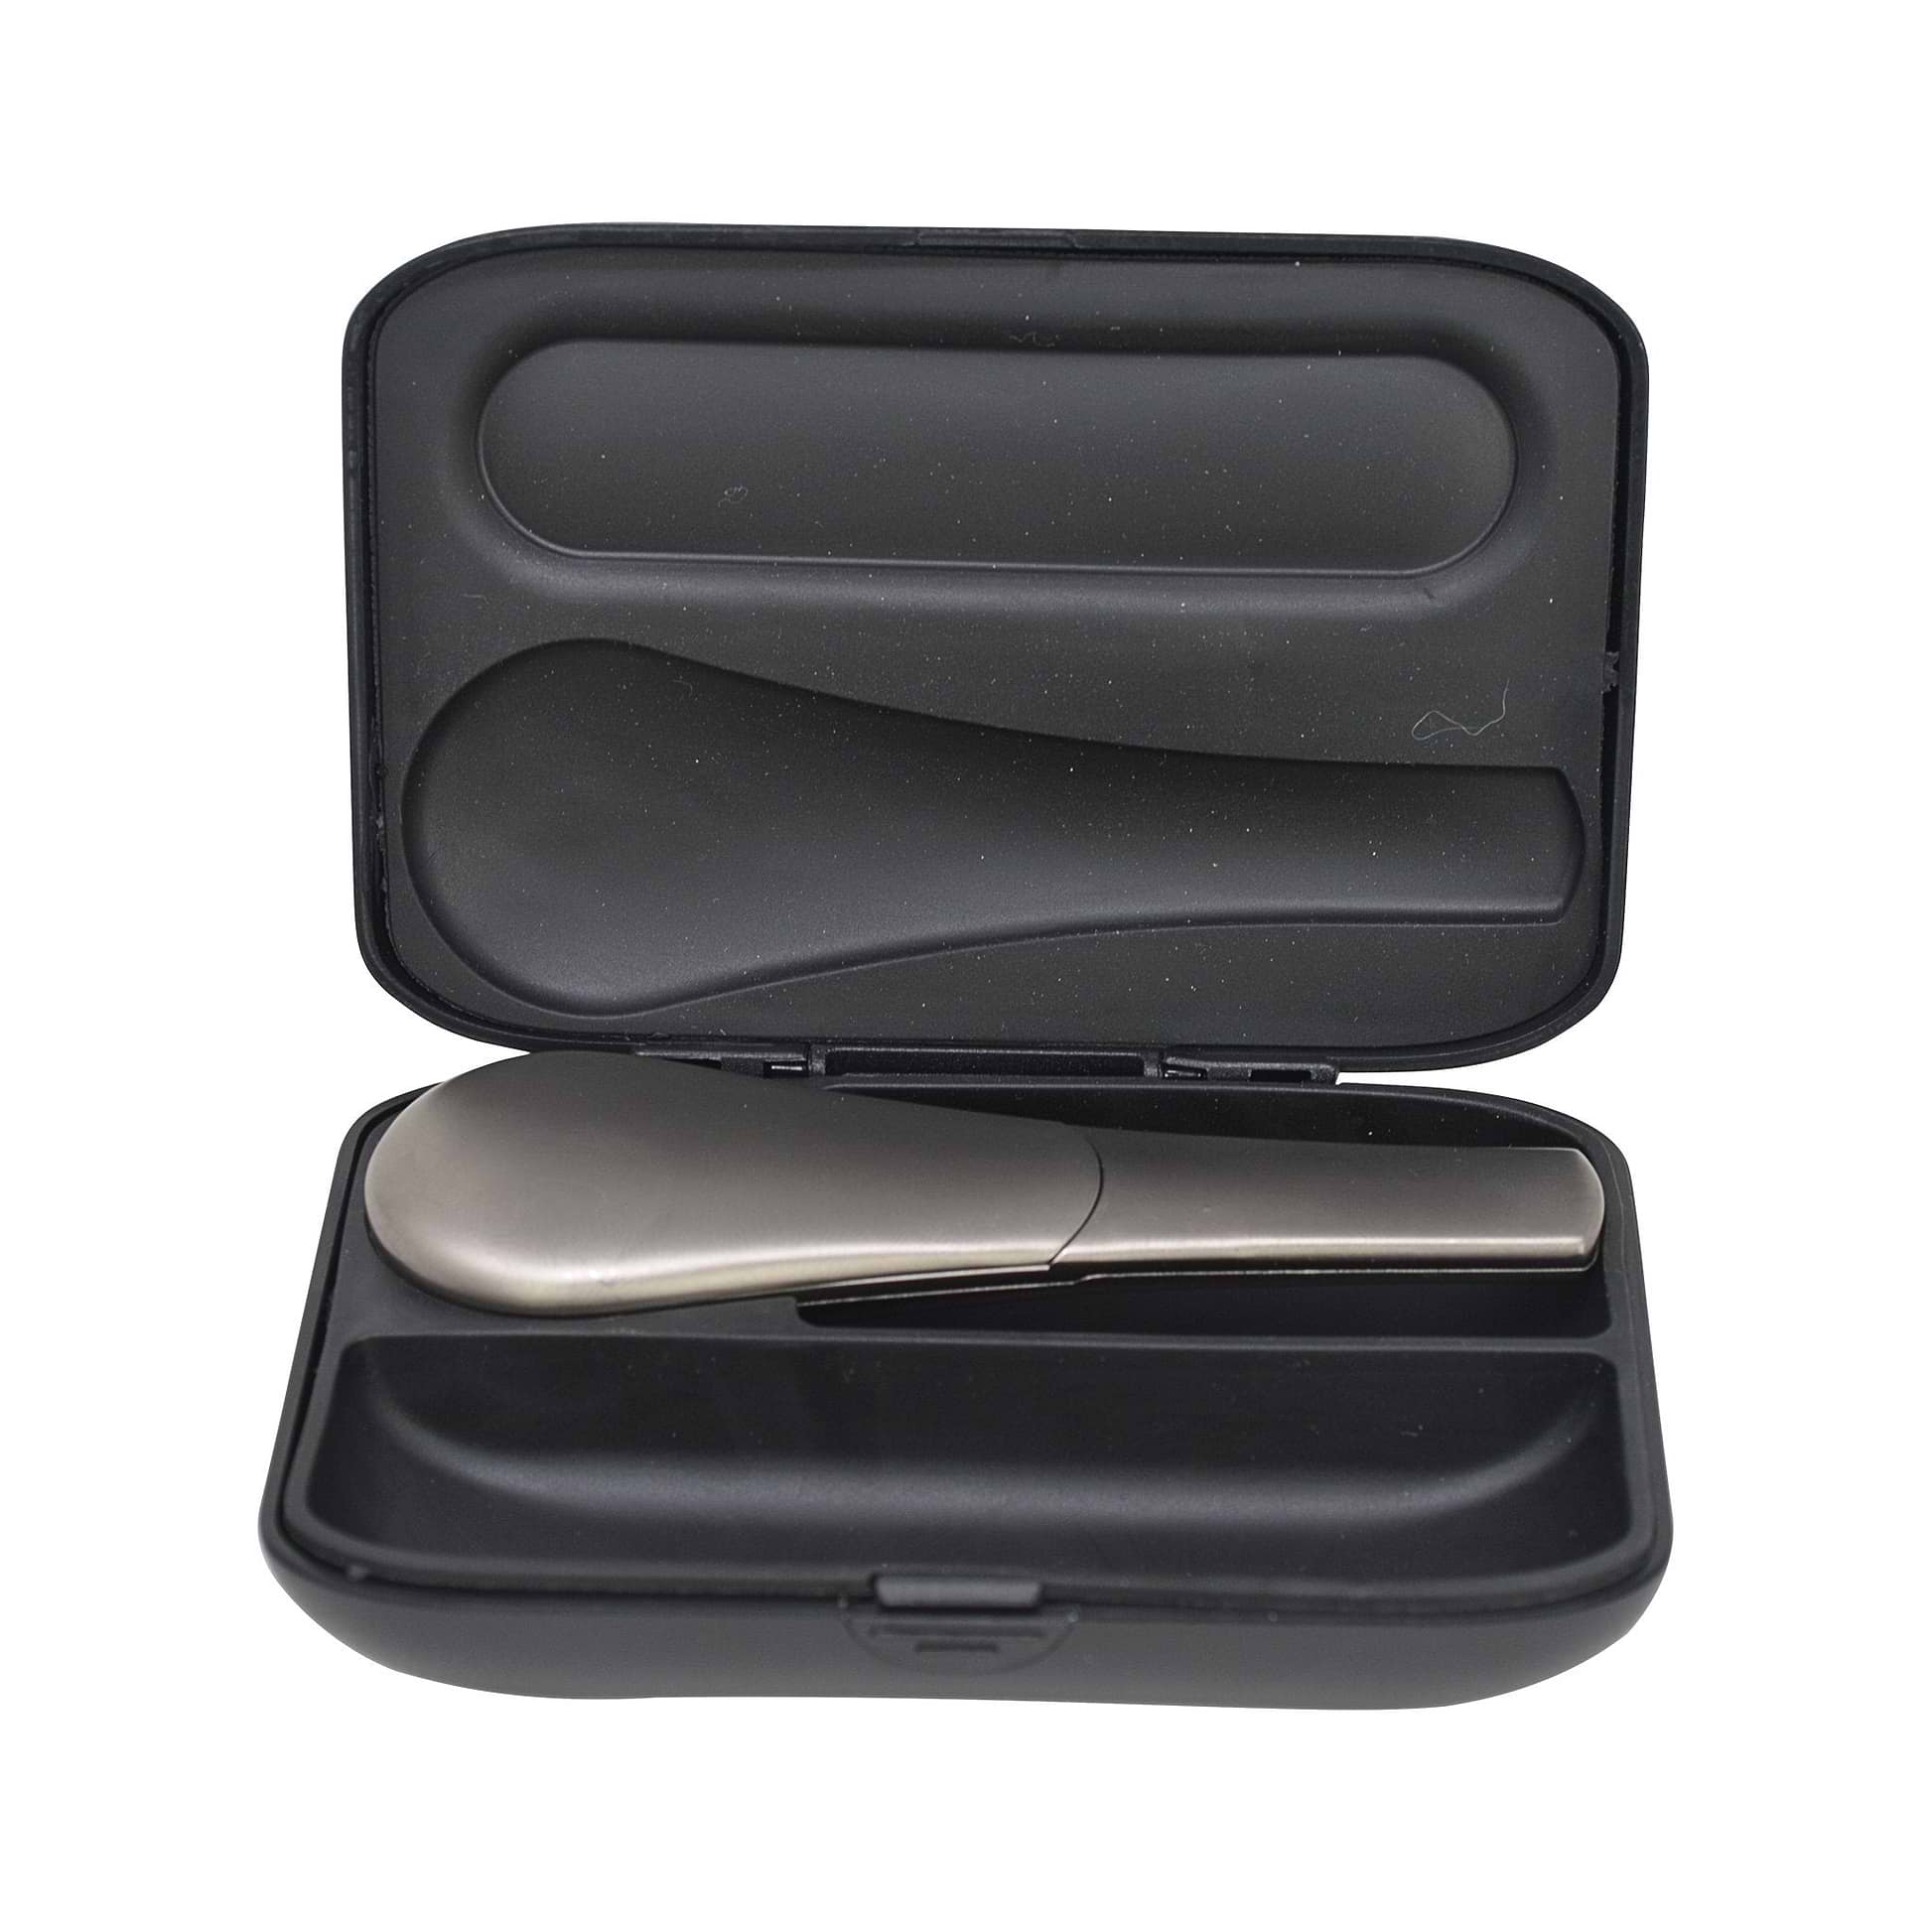 3.5 inch magnetic travel hand pipe smoking device in a discreet spoon shape in stylish metallic colors in an elegant case